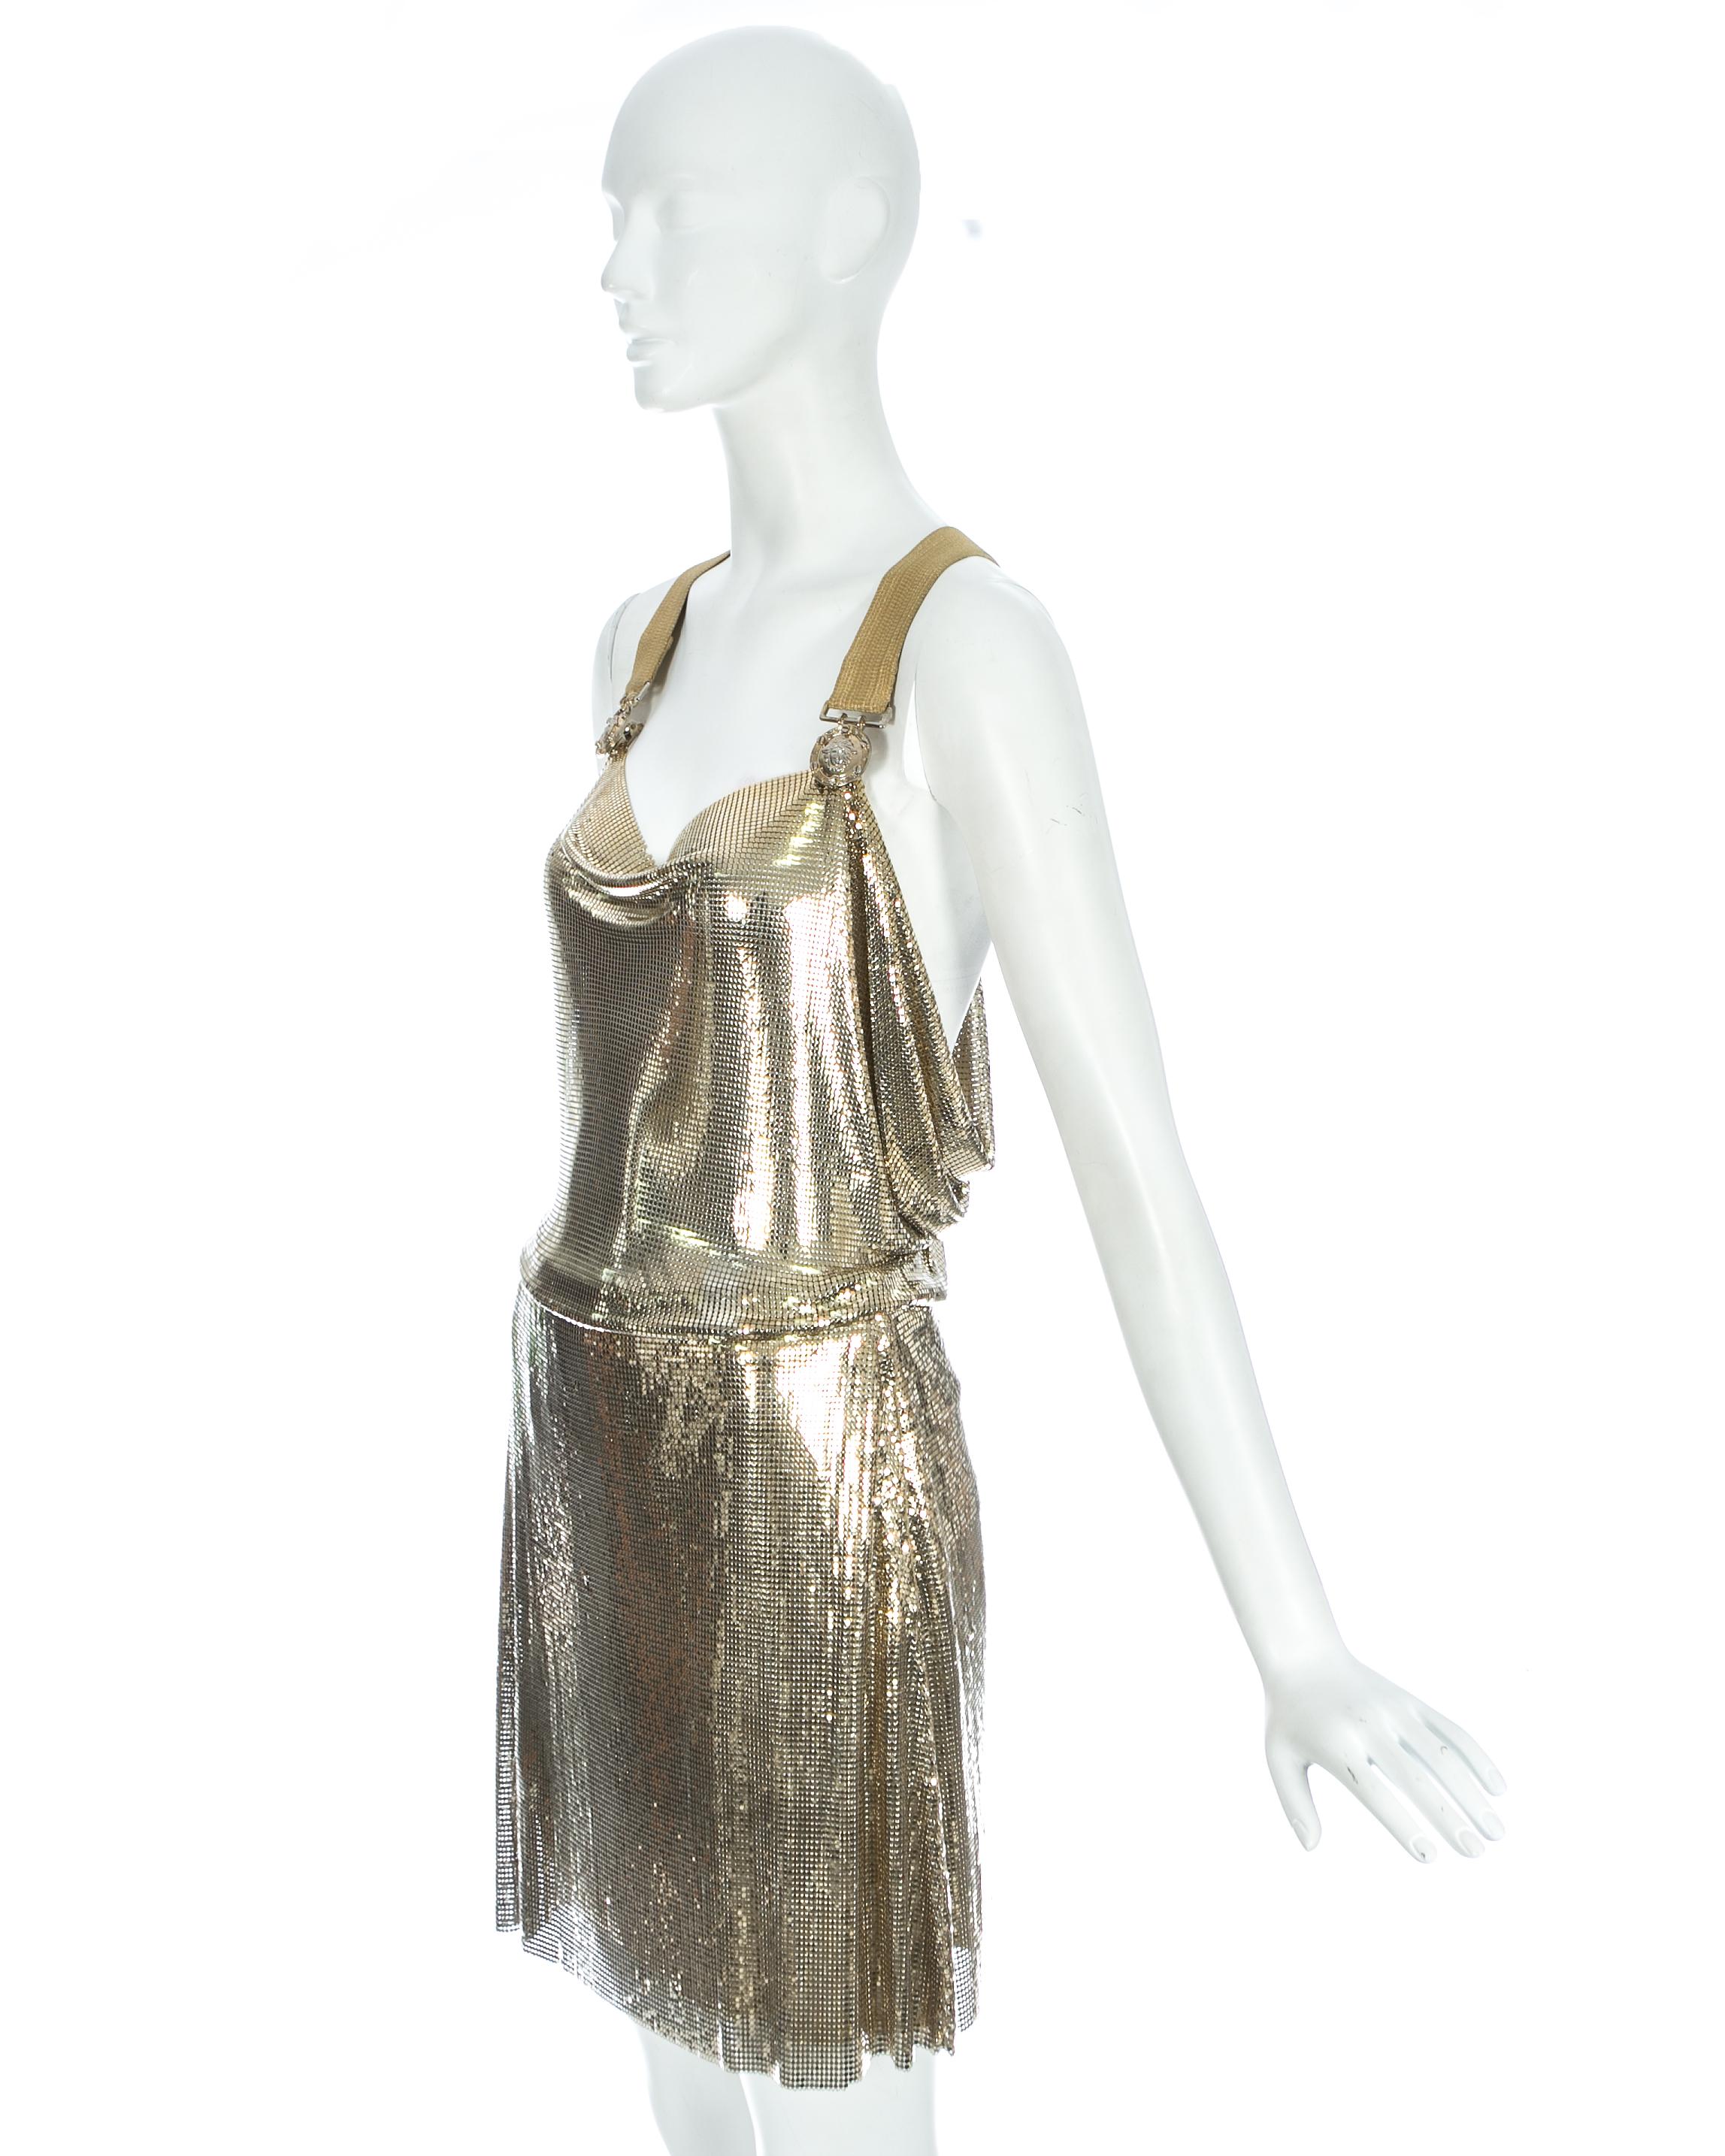 Gray Gianni Versace gold metal mesh chainmail evening dress, fw 1994